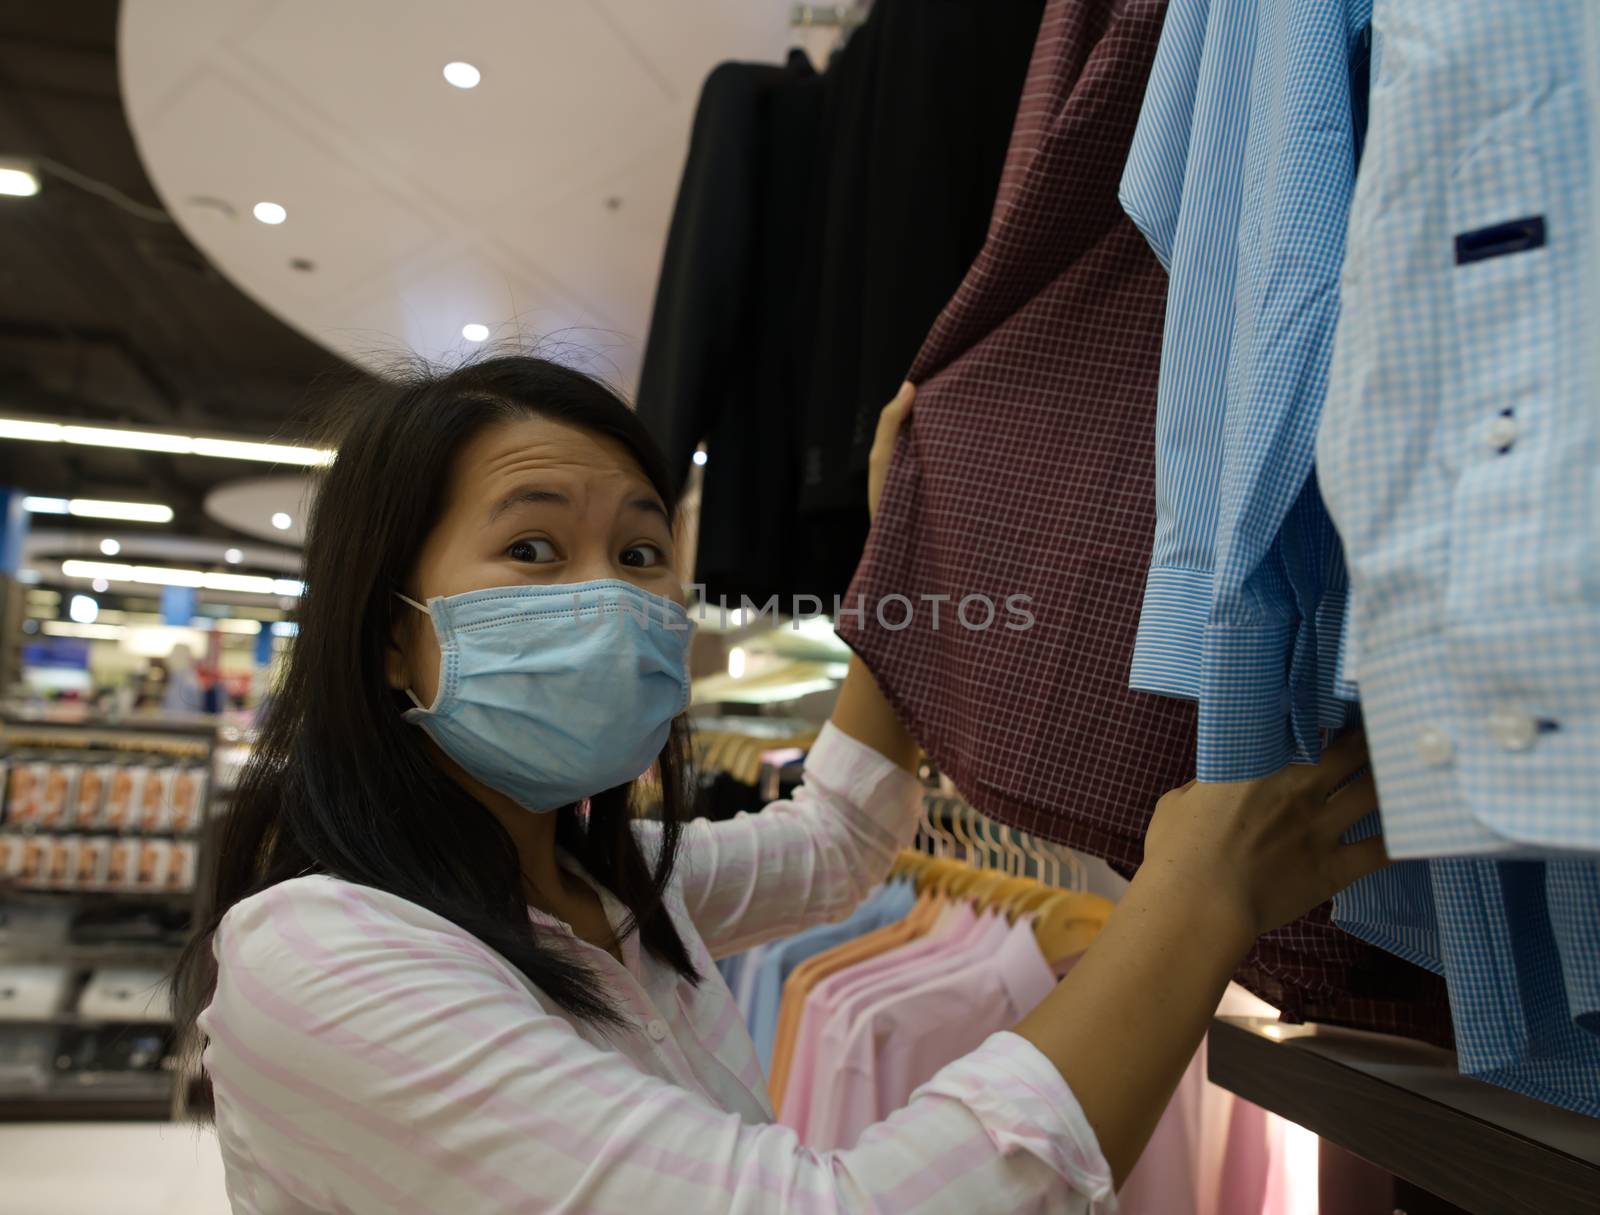 A woman shopping in a mall wearing a protective mask to prevent the coronavirus.